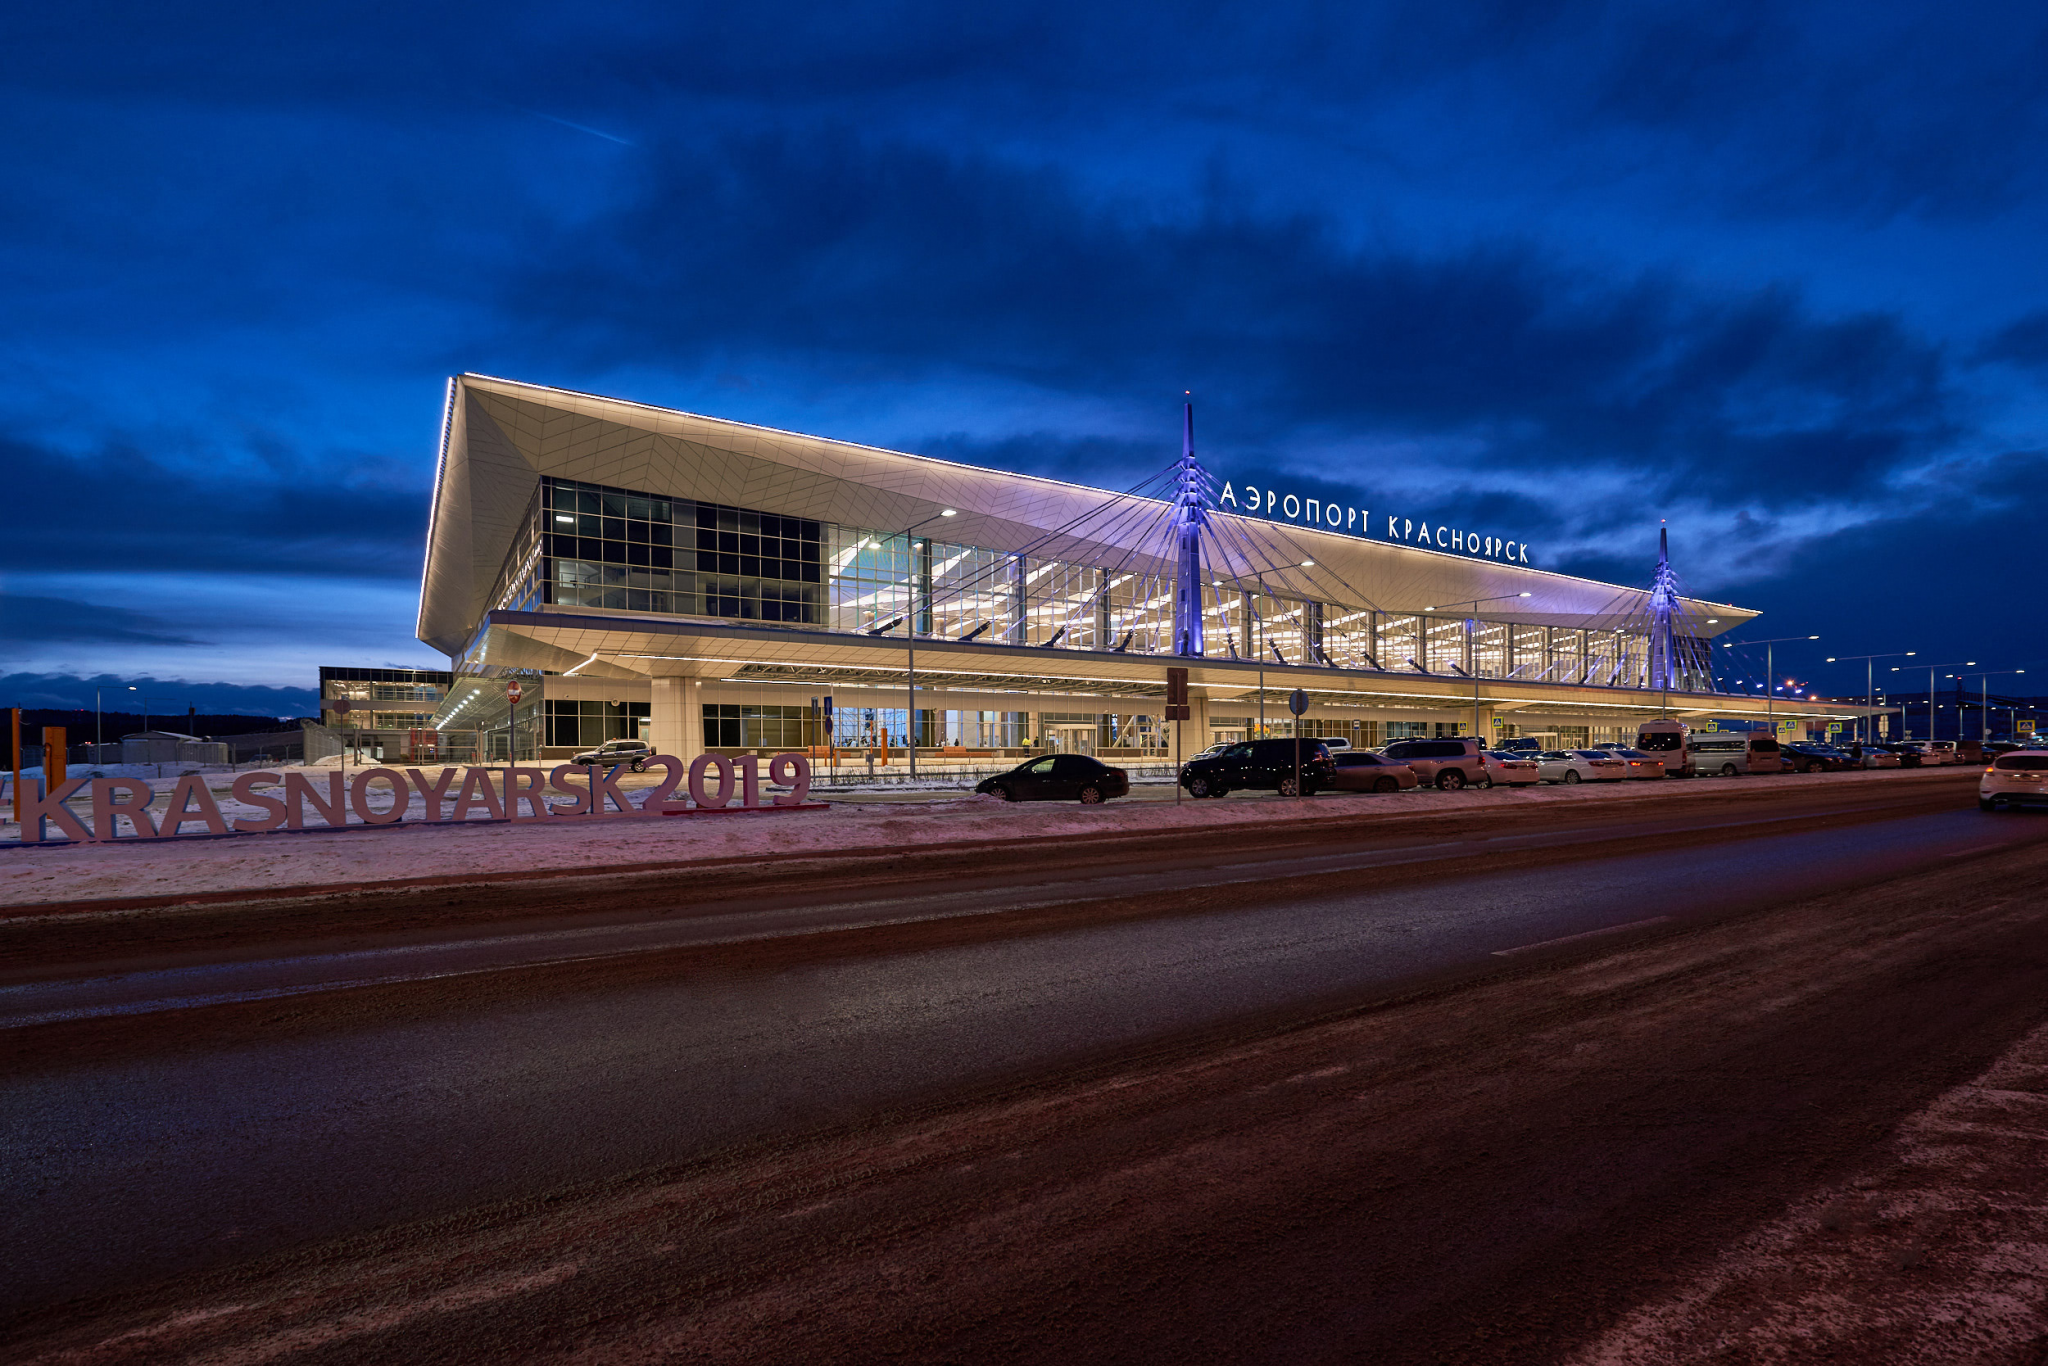 Organisers state the basic package for hospitality will include transfers from and to the airport, as well as hotel or hostel accommodation ©Krasnoyarsk 2019